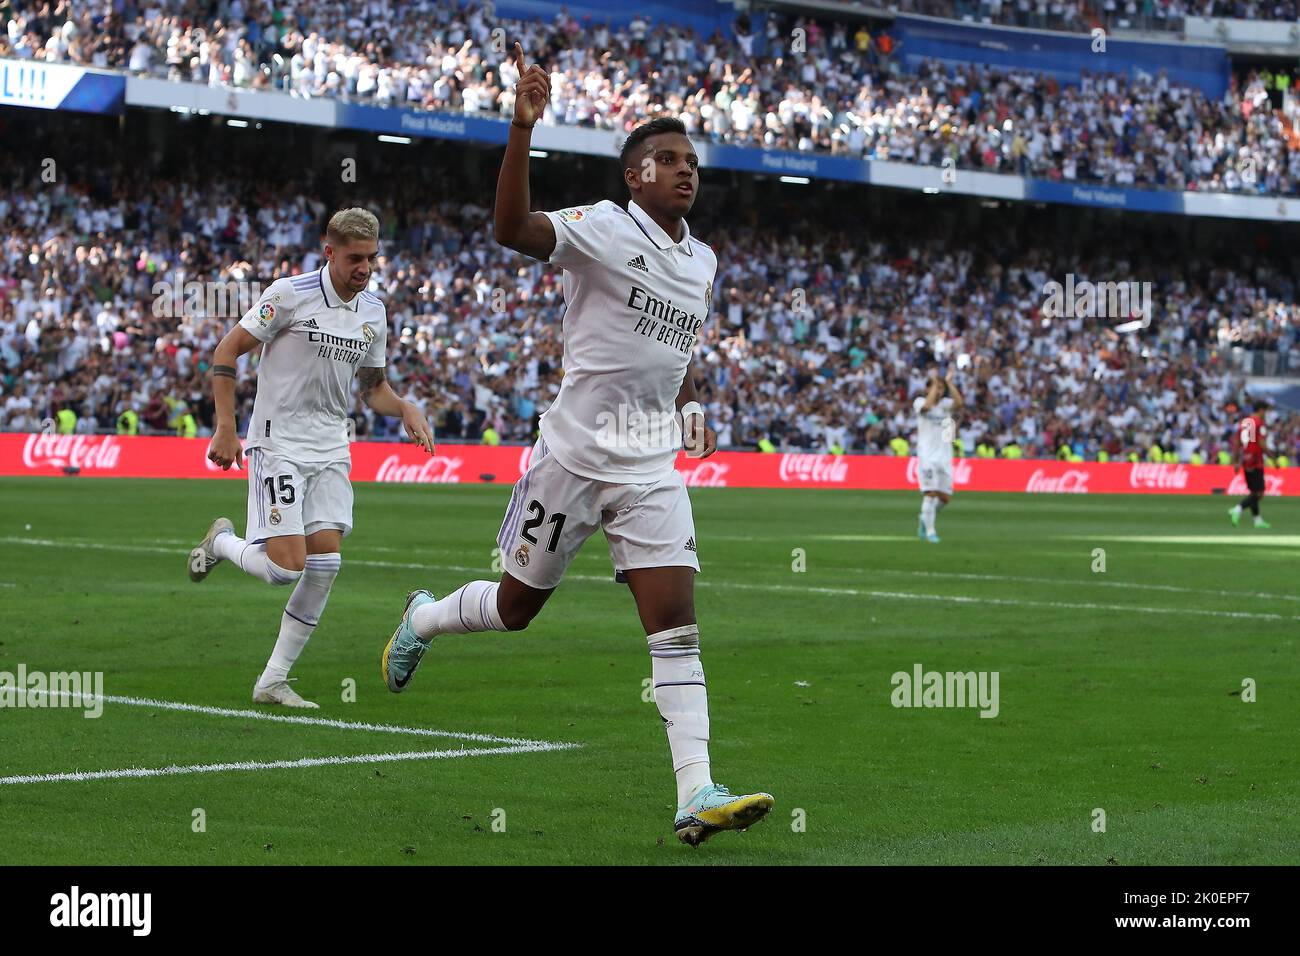 Madrid, Spain. 11th September, 2022. Real Madrid´s Rodrygo celebrates during La Liga match day 5 between Real Madrid and Mallorca at Santiago Bernabeu Stadium in Madrid, Spain, on September 11, 2022. Credit: Edward F. Peters/Alamy Live News Stock Photo